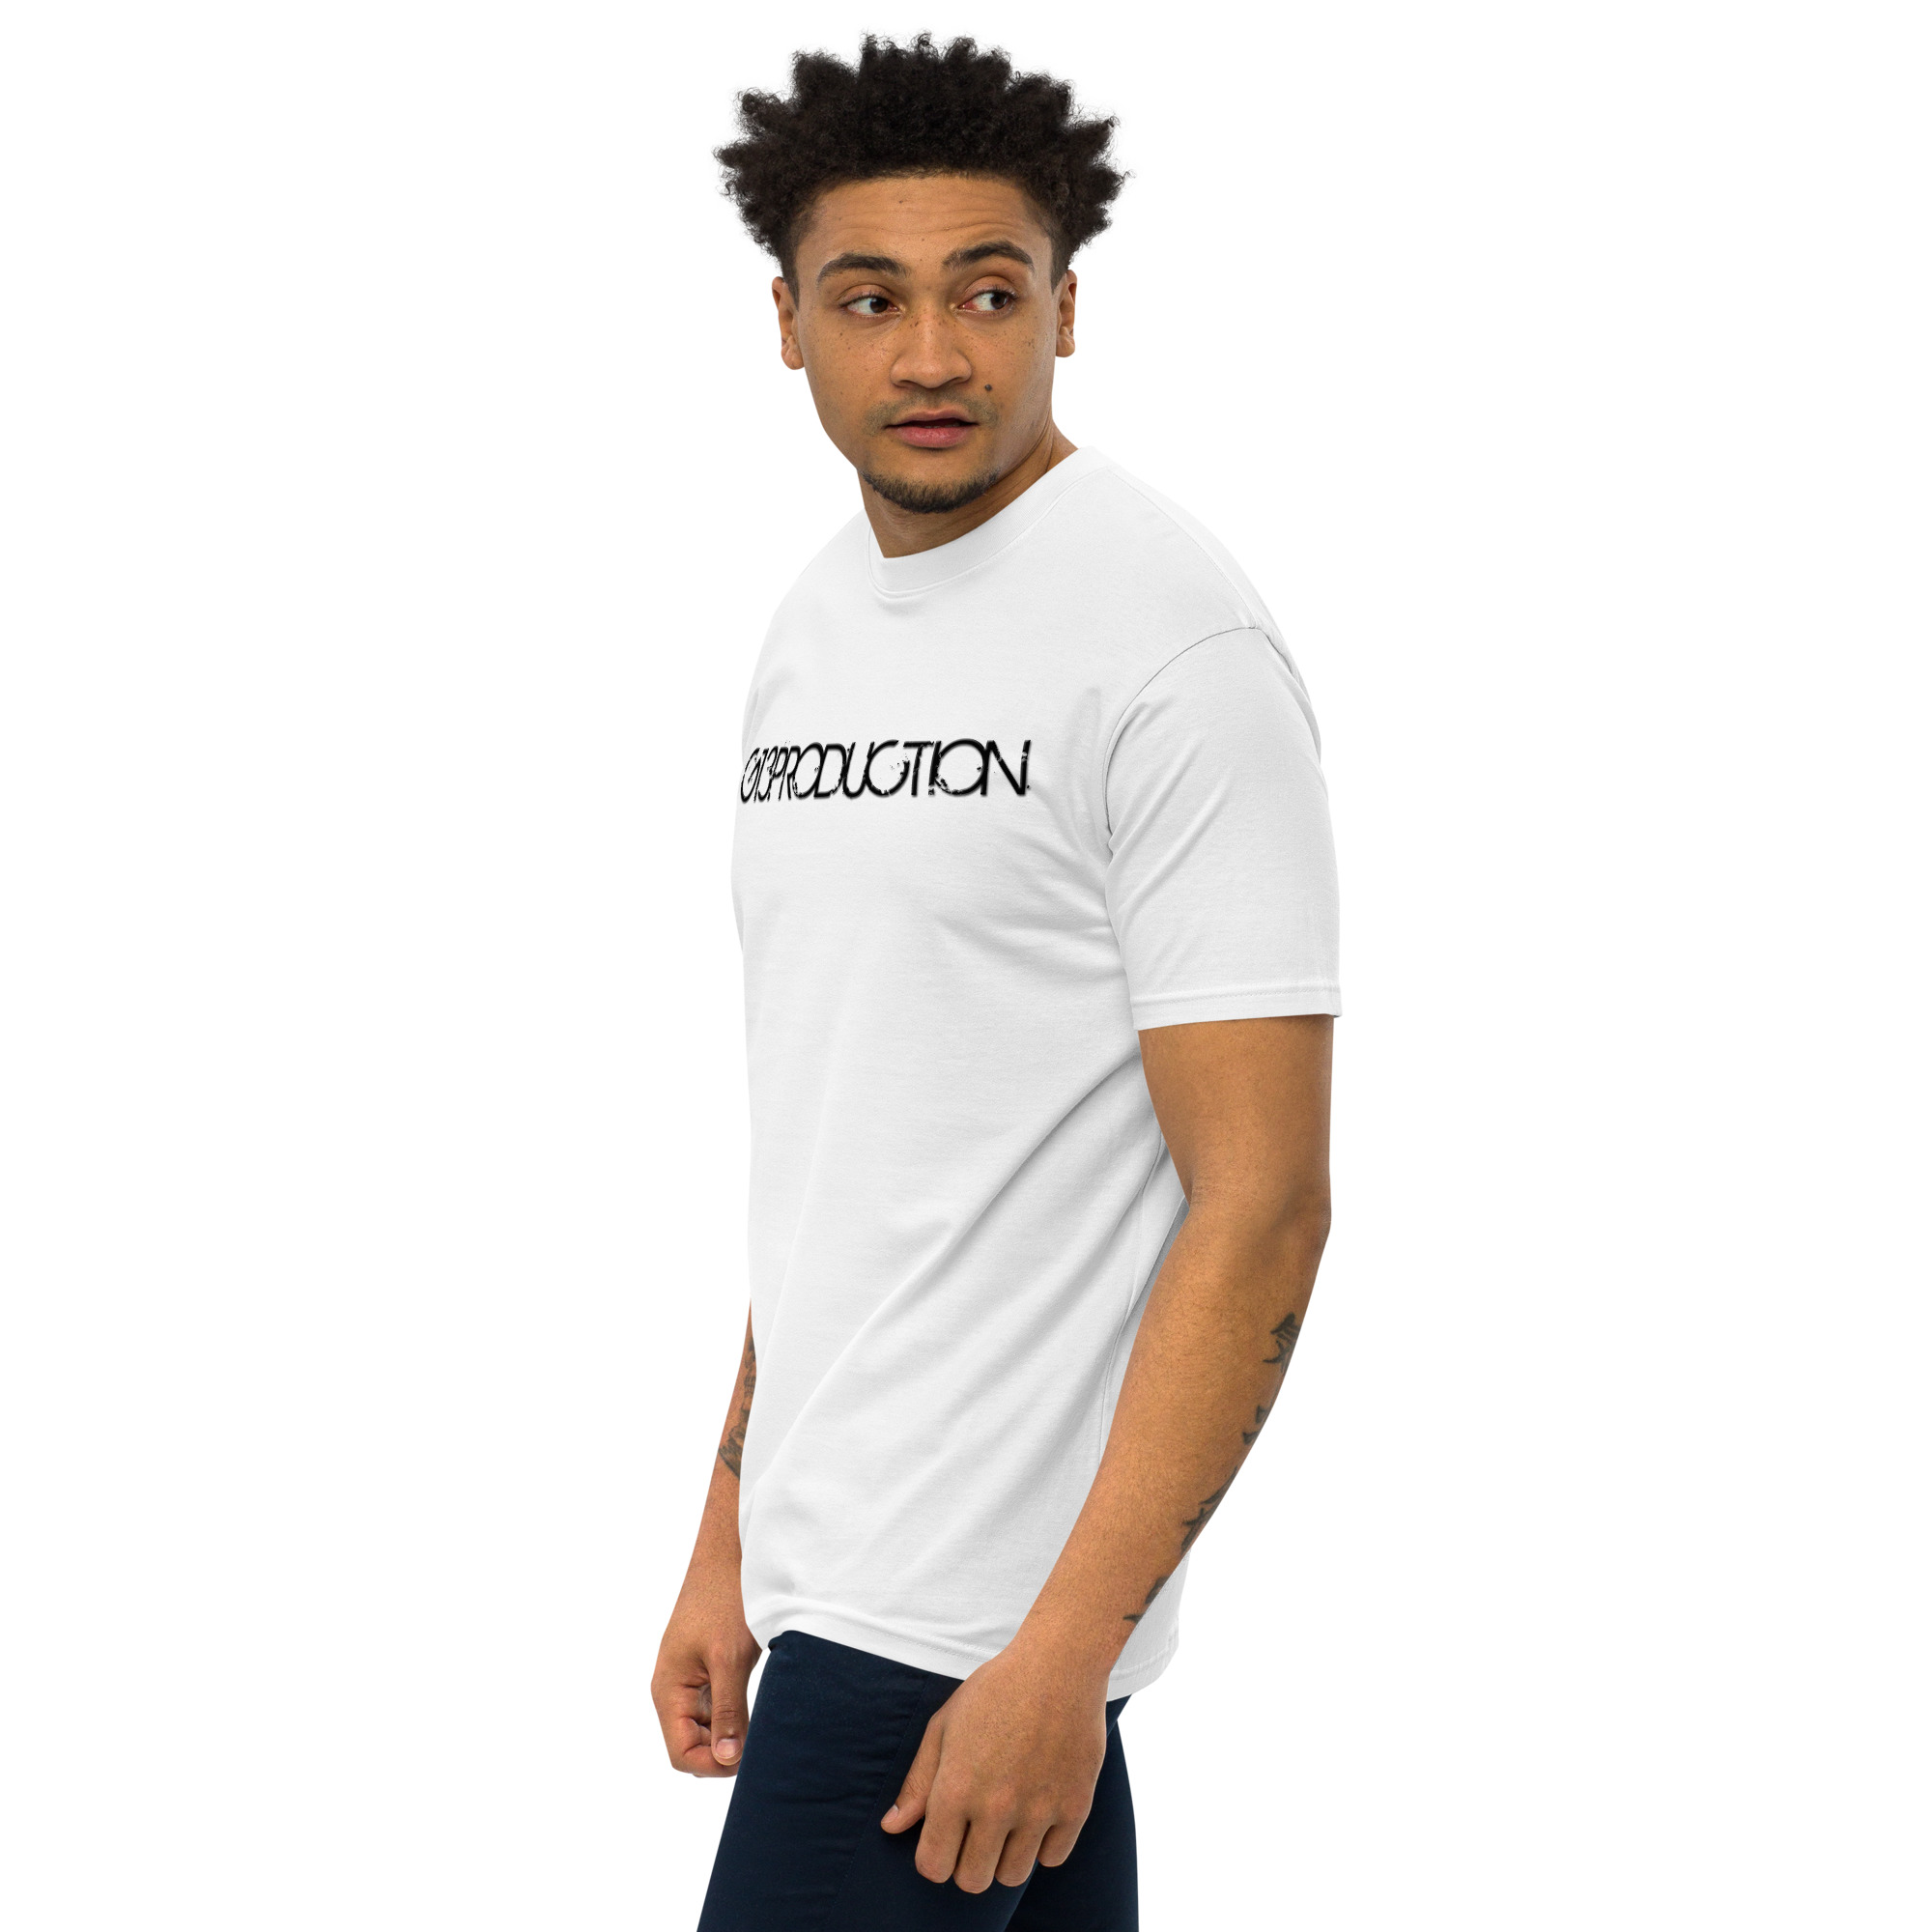 A man wearing a white t-shirt with the word religion on it.